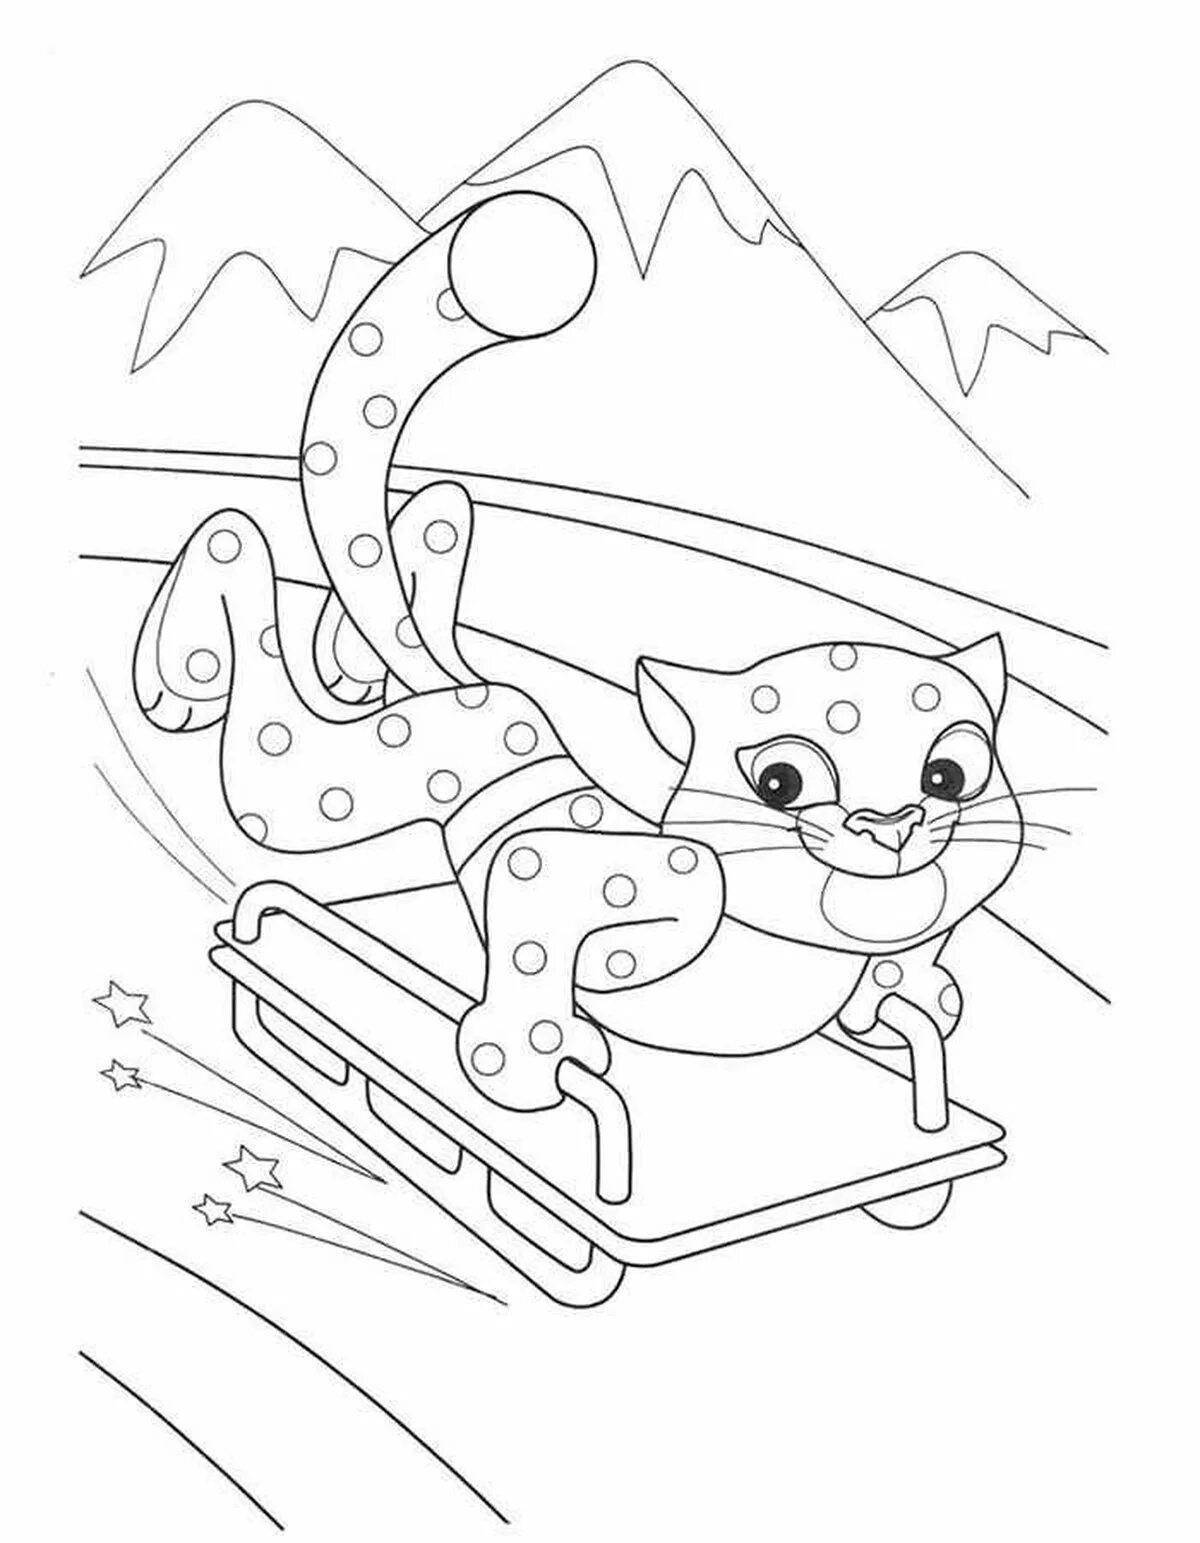 Glorious Olympic Winter Games coloring page